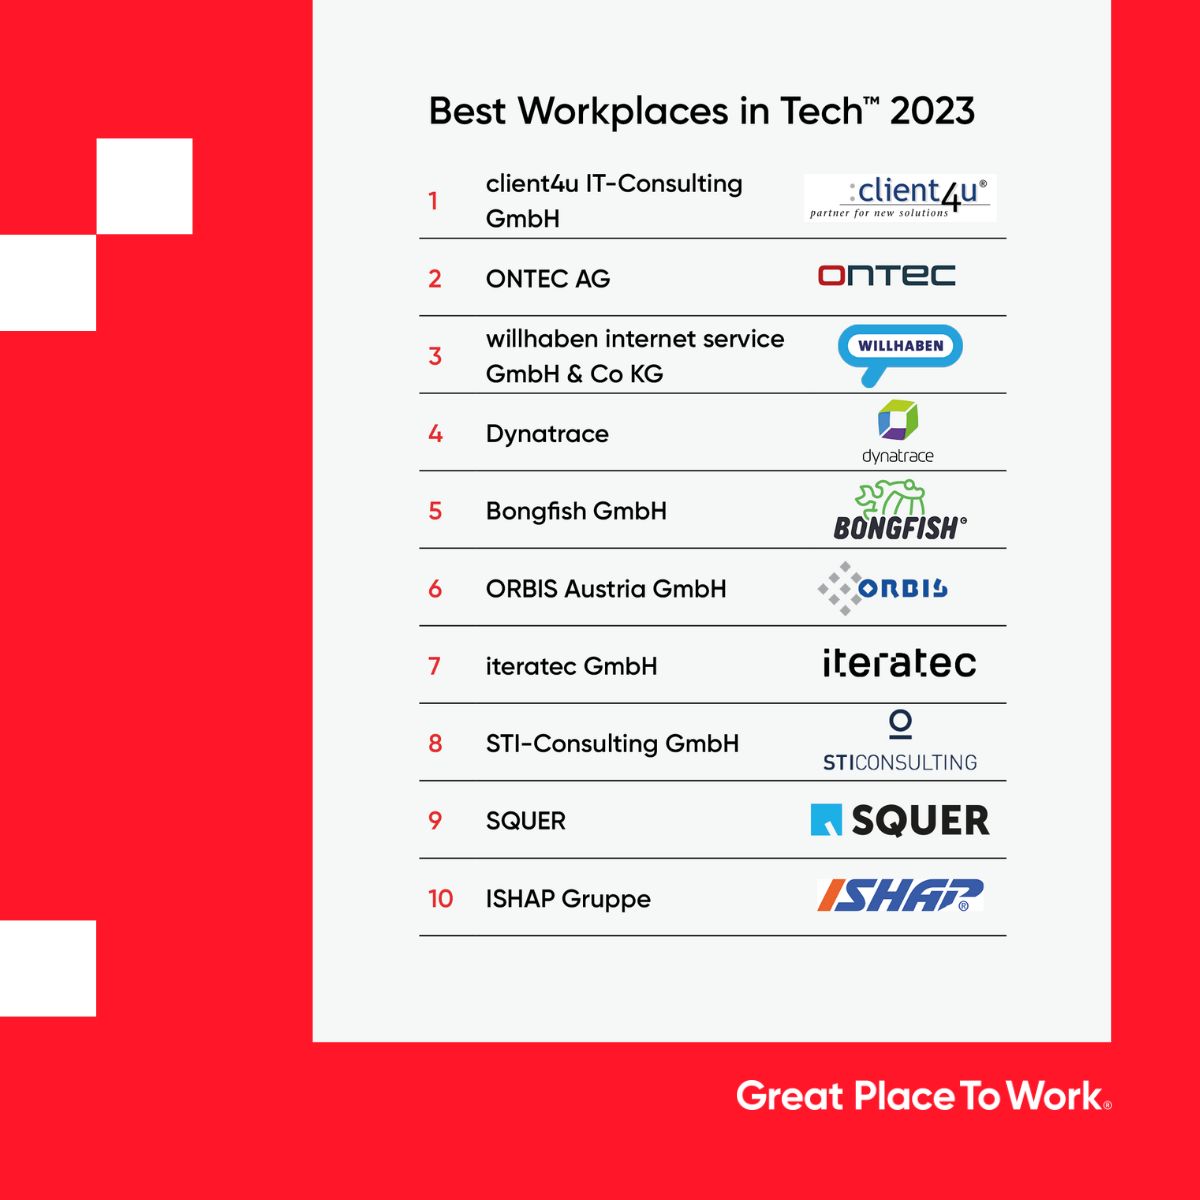 Best Workplaces in Tech 2023 (c) Great Place to Work